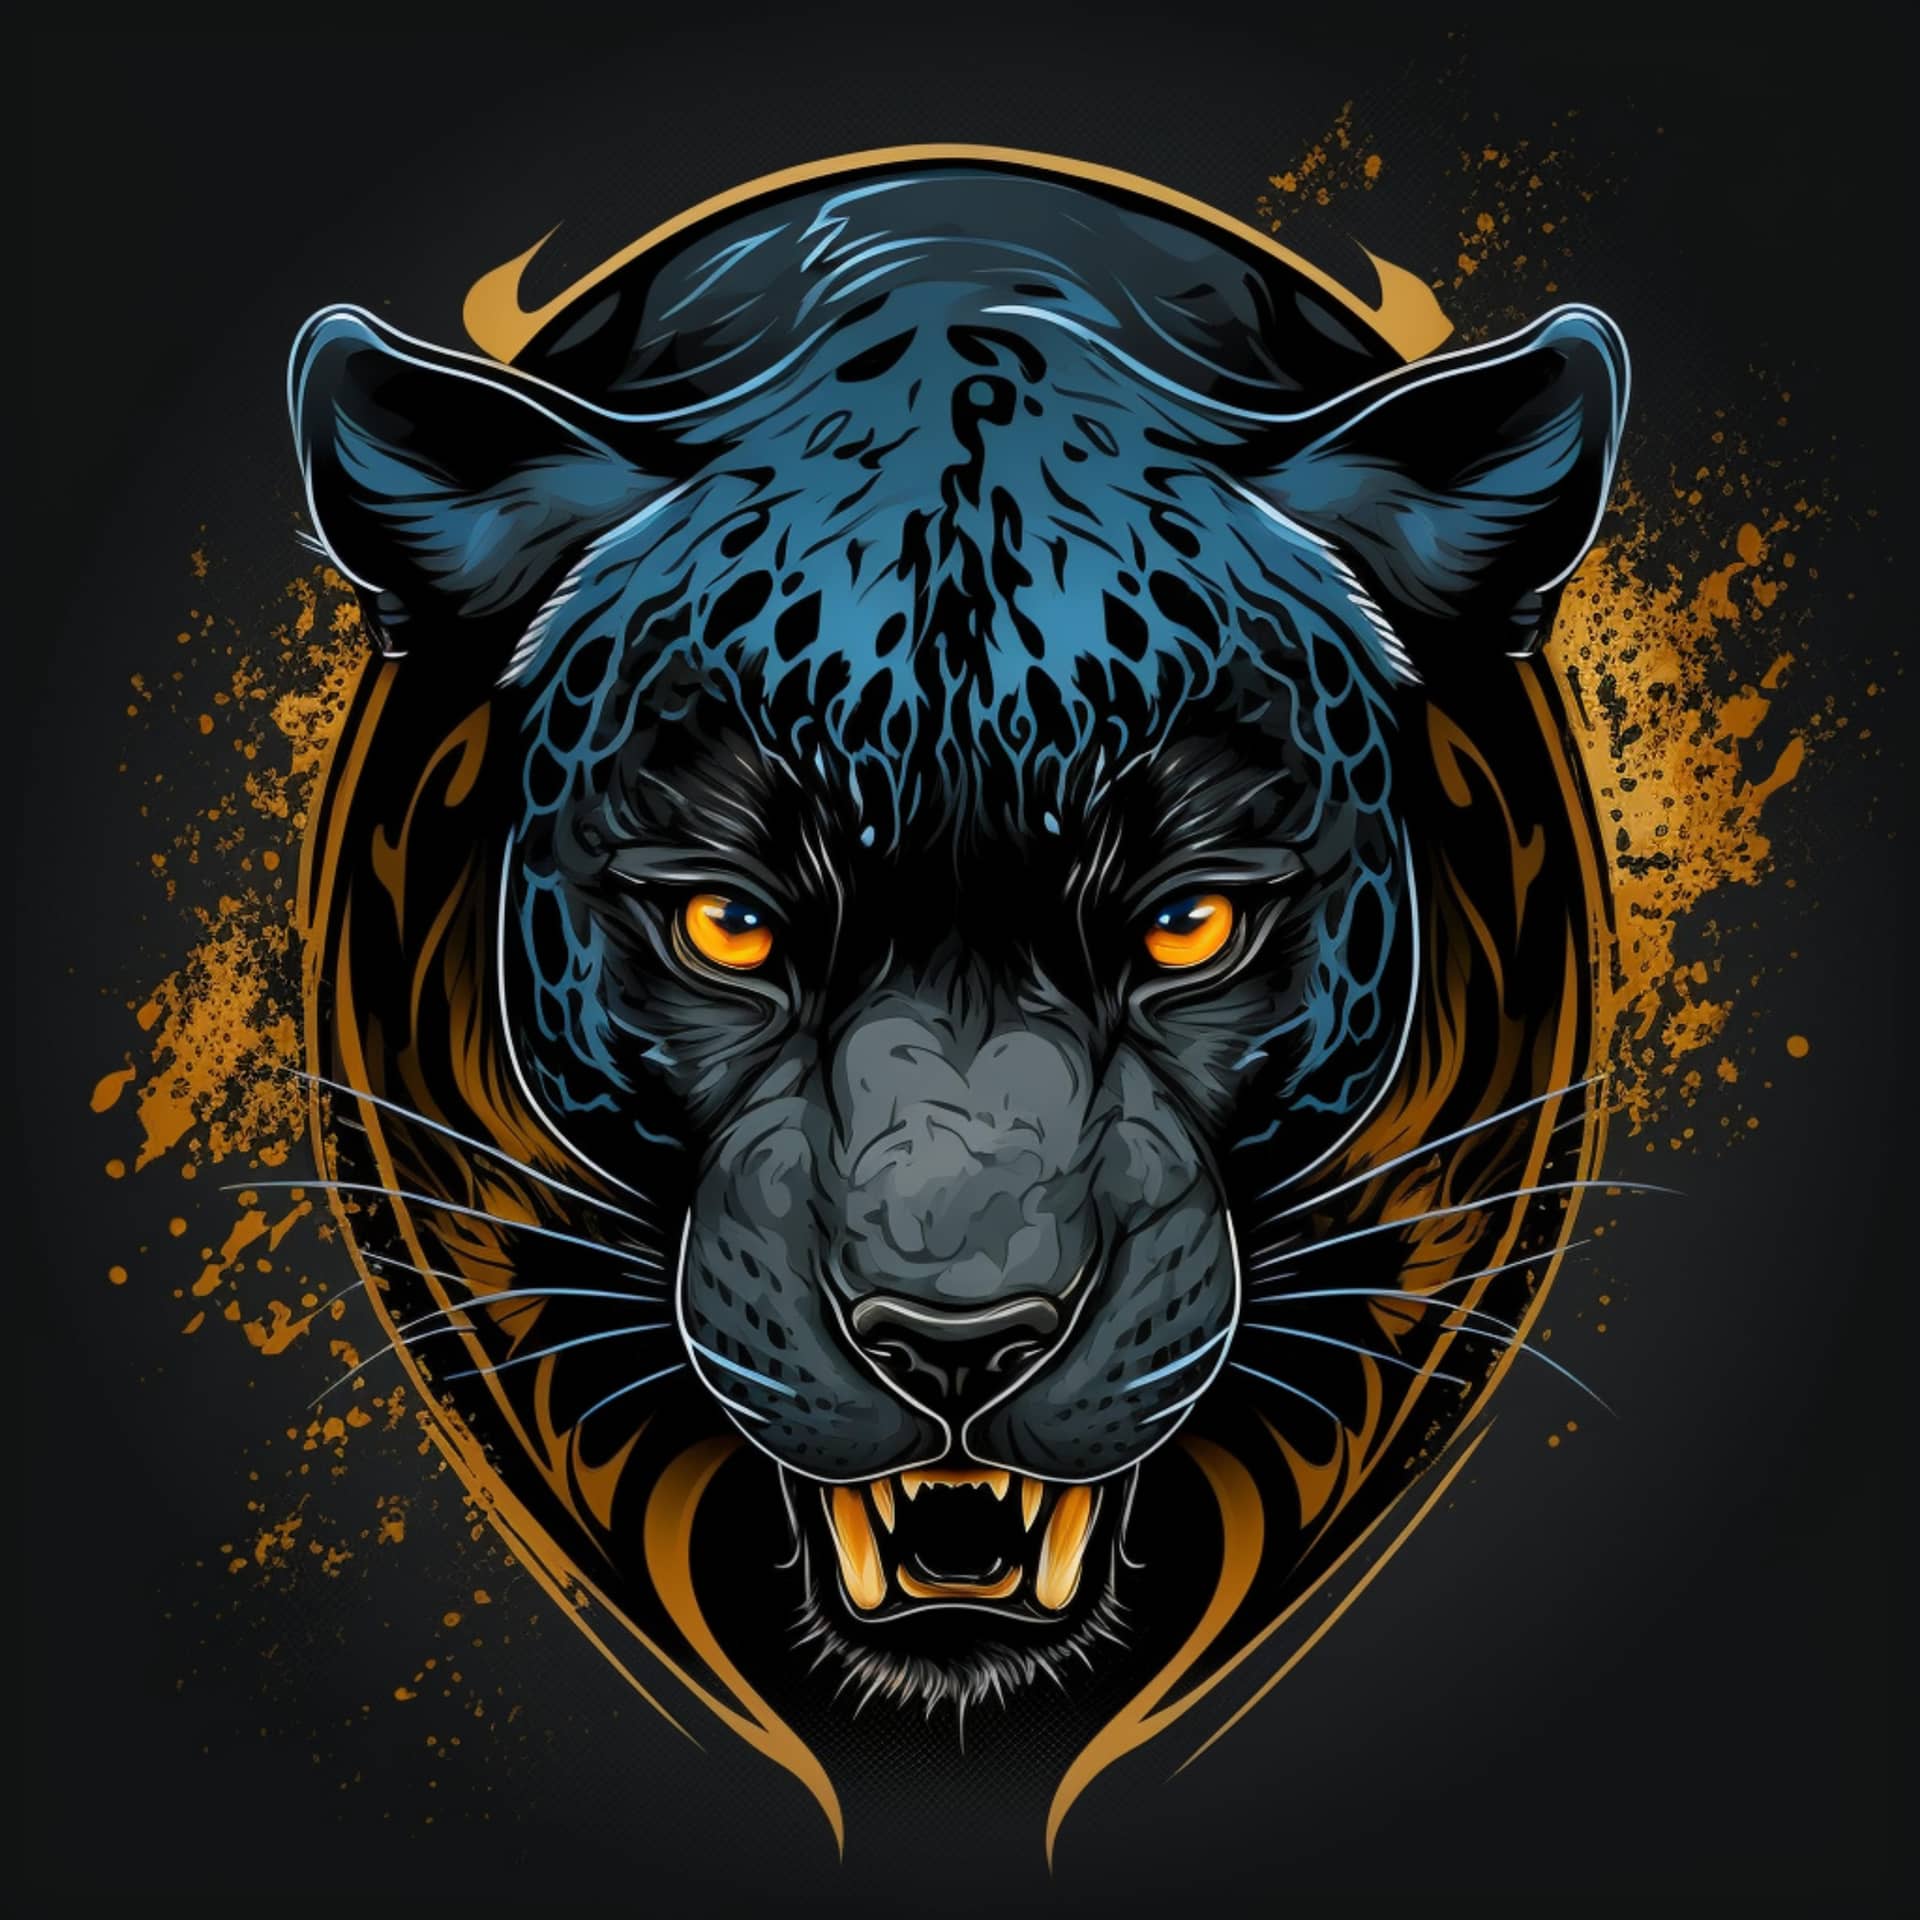 Fb profile pic illustration panther design nice picture